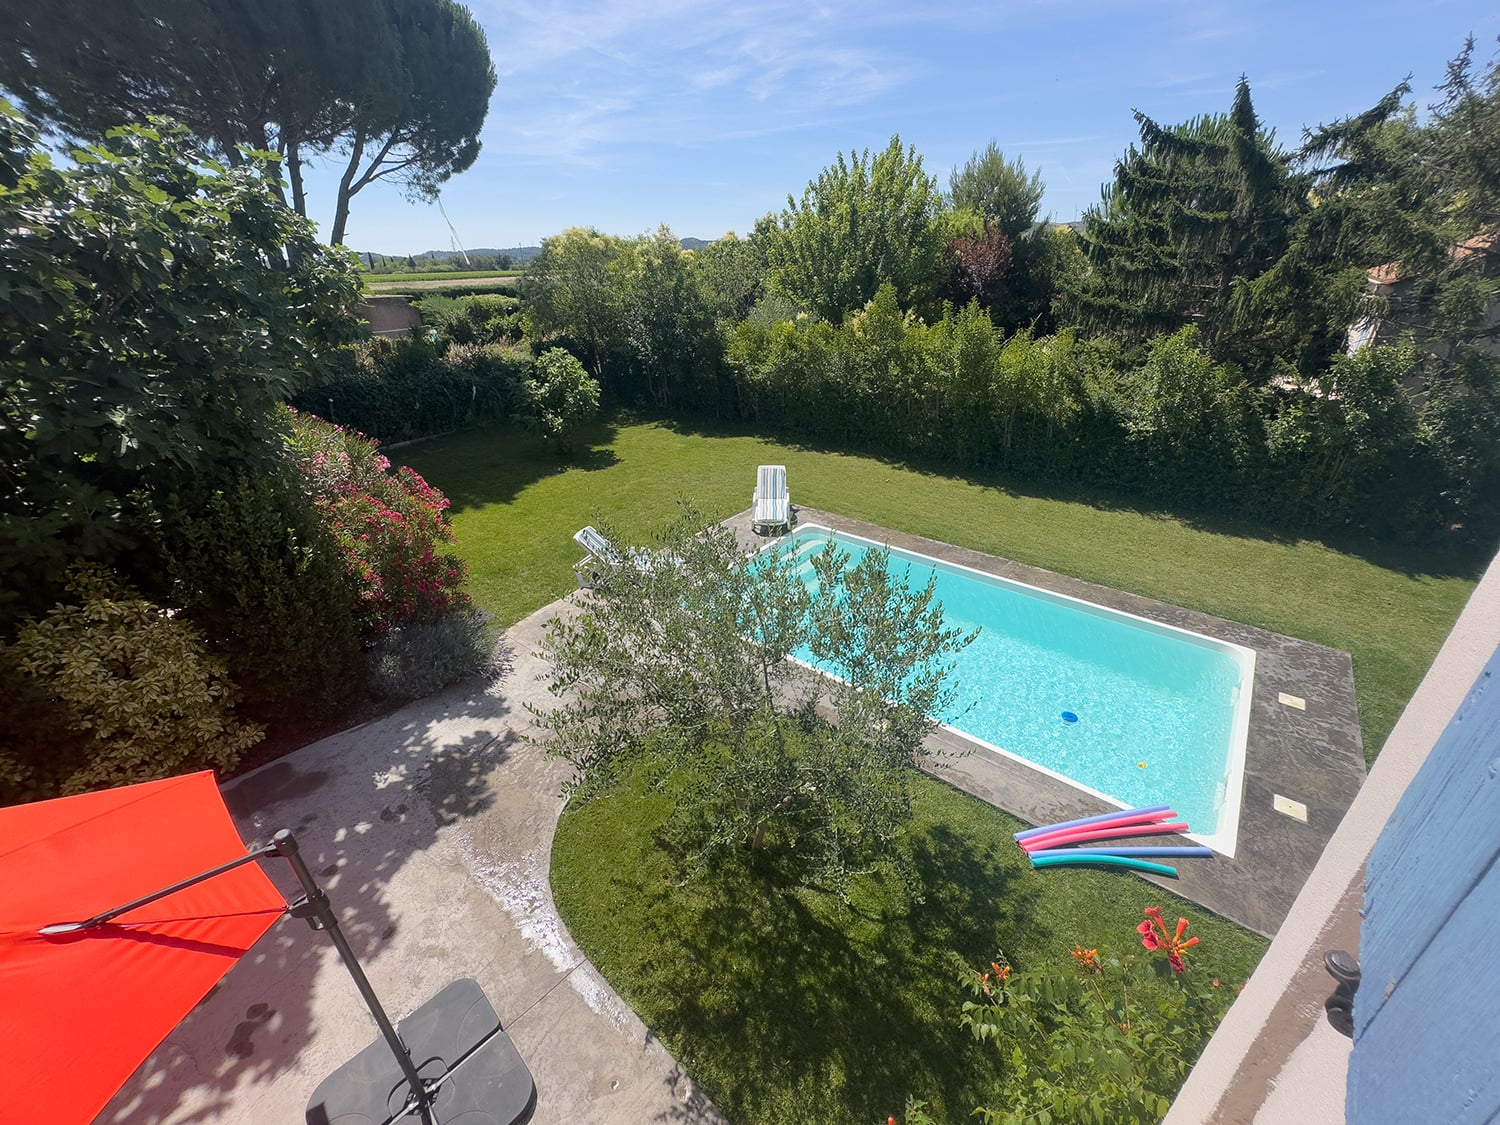 Private pool and lawned garden